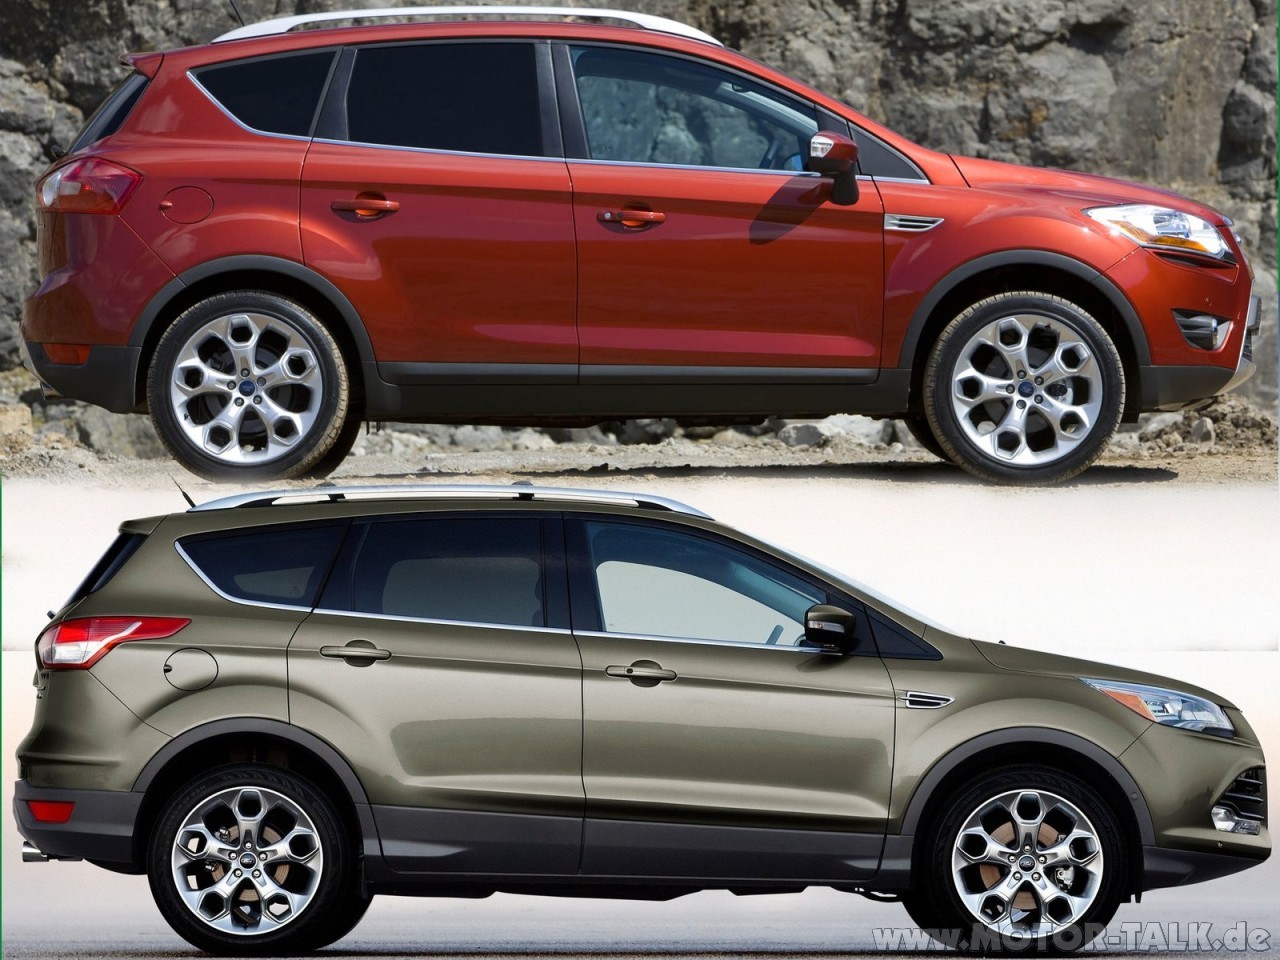 Ford Escape Prices, Reviews and New Model Information ...